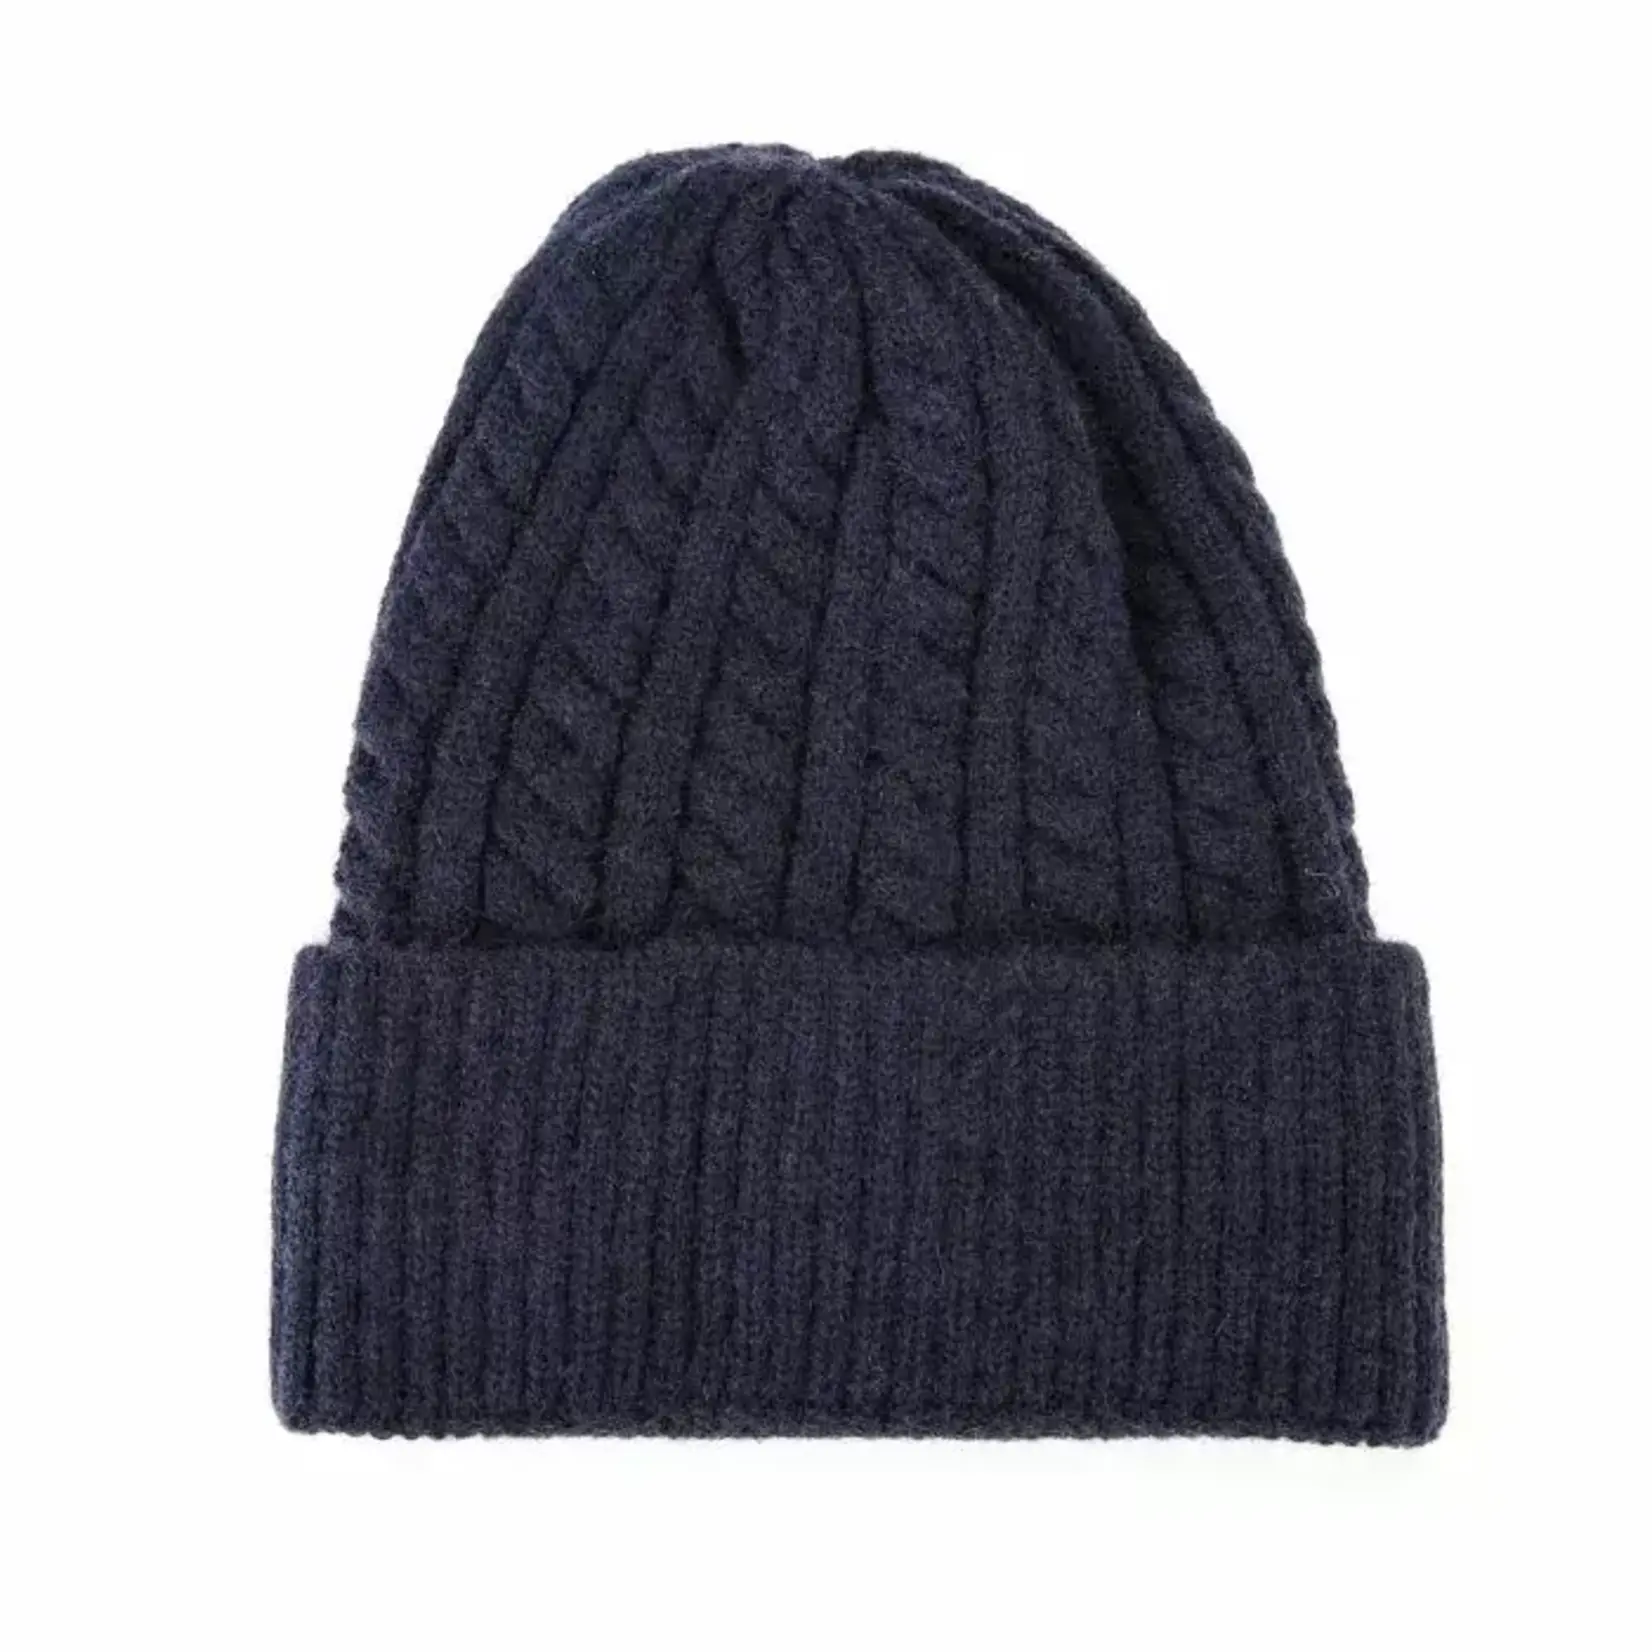 More the Firm Basic winter beanie kabel